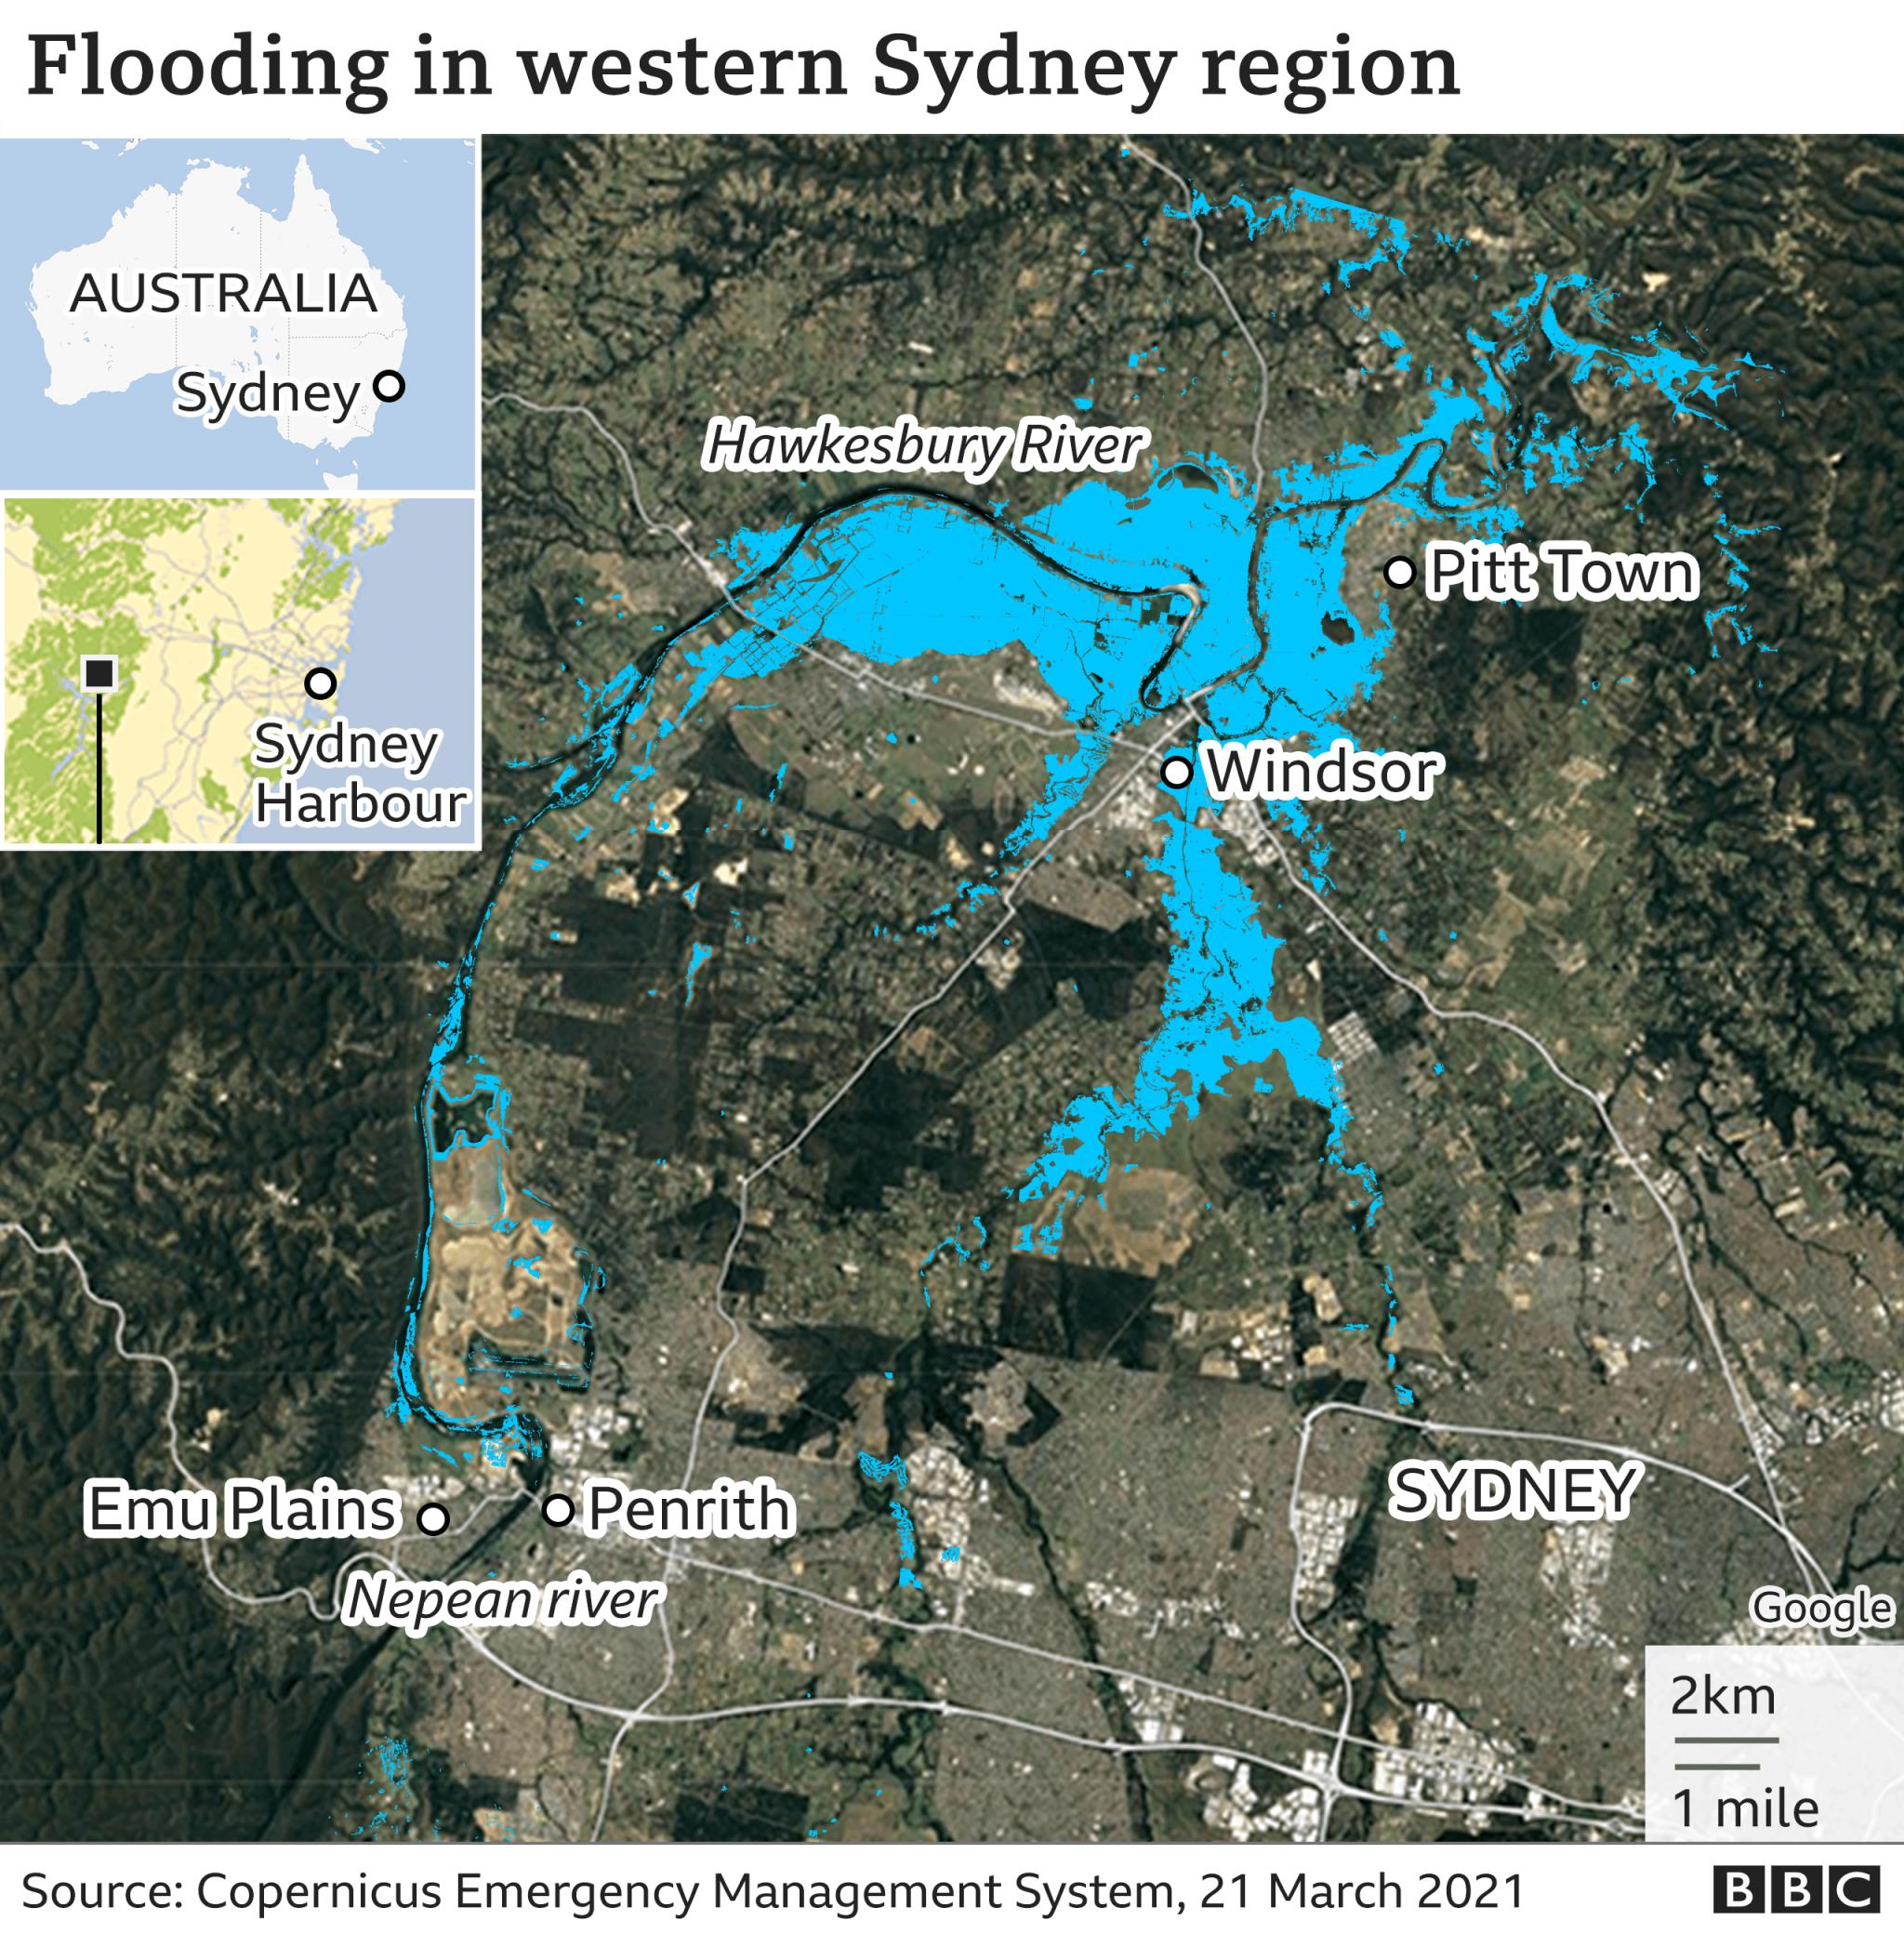 Satellite image showing extent of flooding in western suburbs around Penrith NSW on 21 March 2021